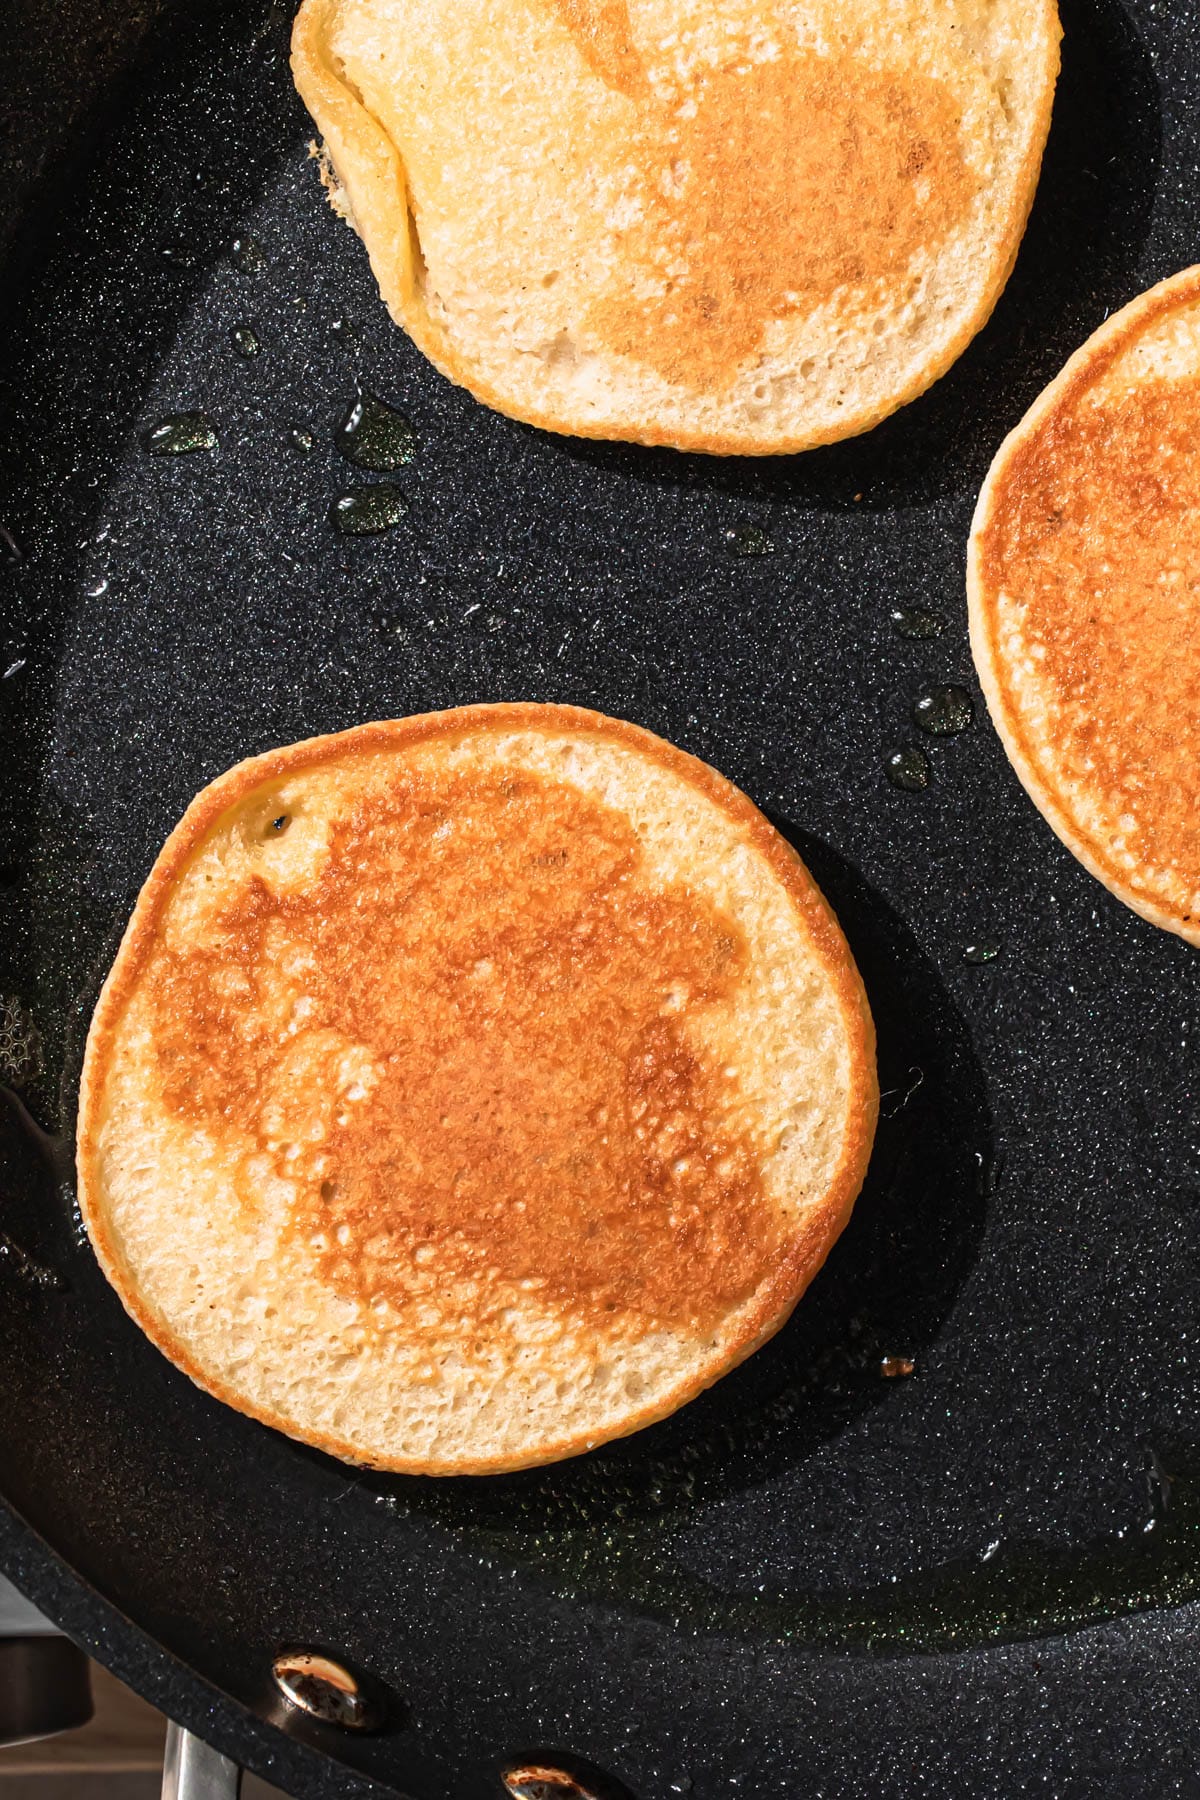 Golden brown pancakes frying in a frypan.